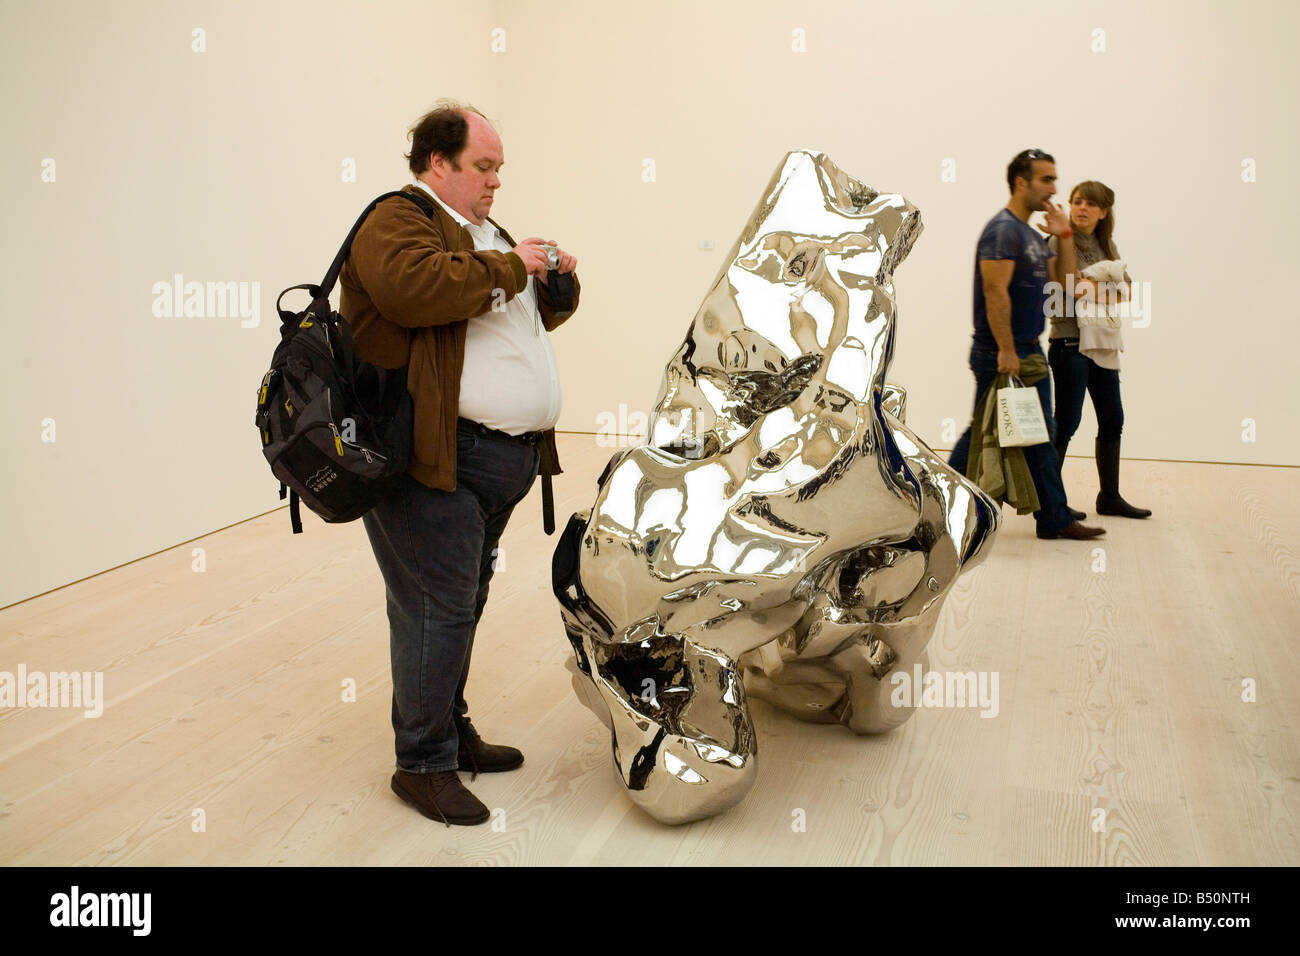 Not sure what it is but I'll take a photo.,,, New Saatchi Art Gallery in Chelsea London Sculpture Ornamental Rock by Zhan Wang. Stock Photo